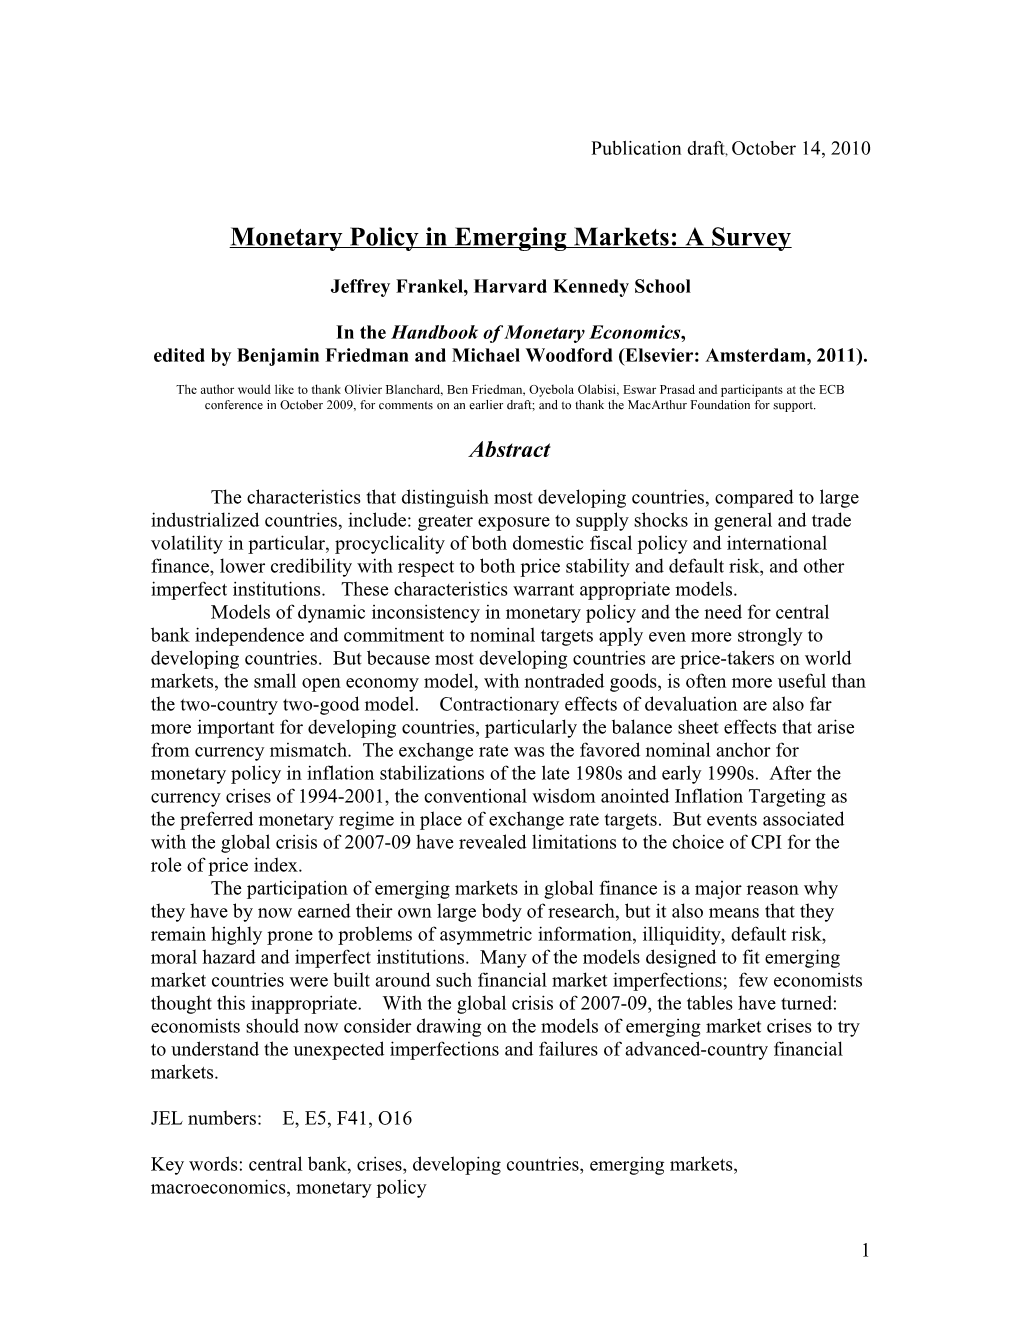 30 Years Ago, the Topic of Macroeconomics Or Monetary Economics for Developing Countries